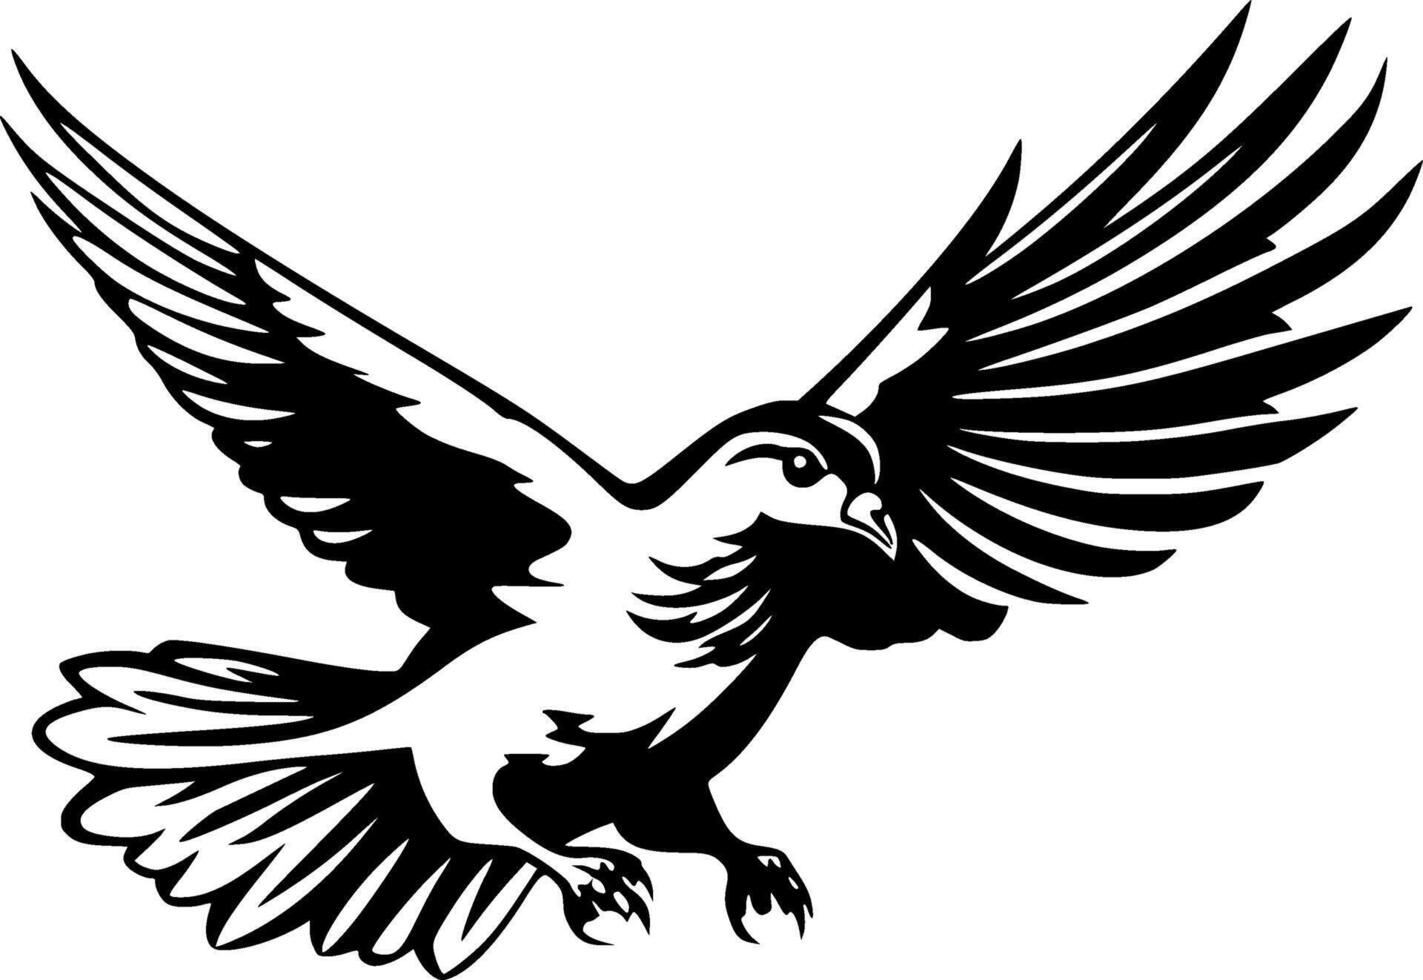 Pigeon - Black and White Isolated Icon - Vector illustration